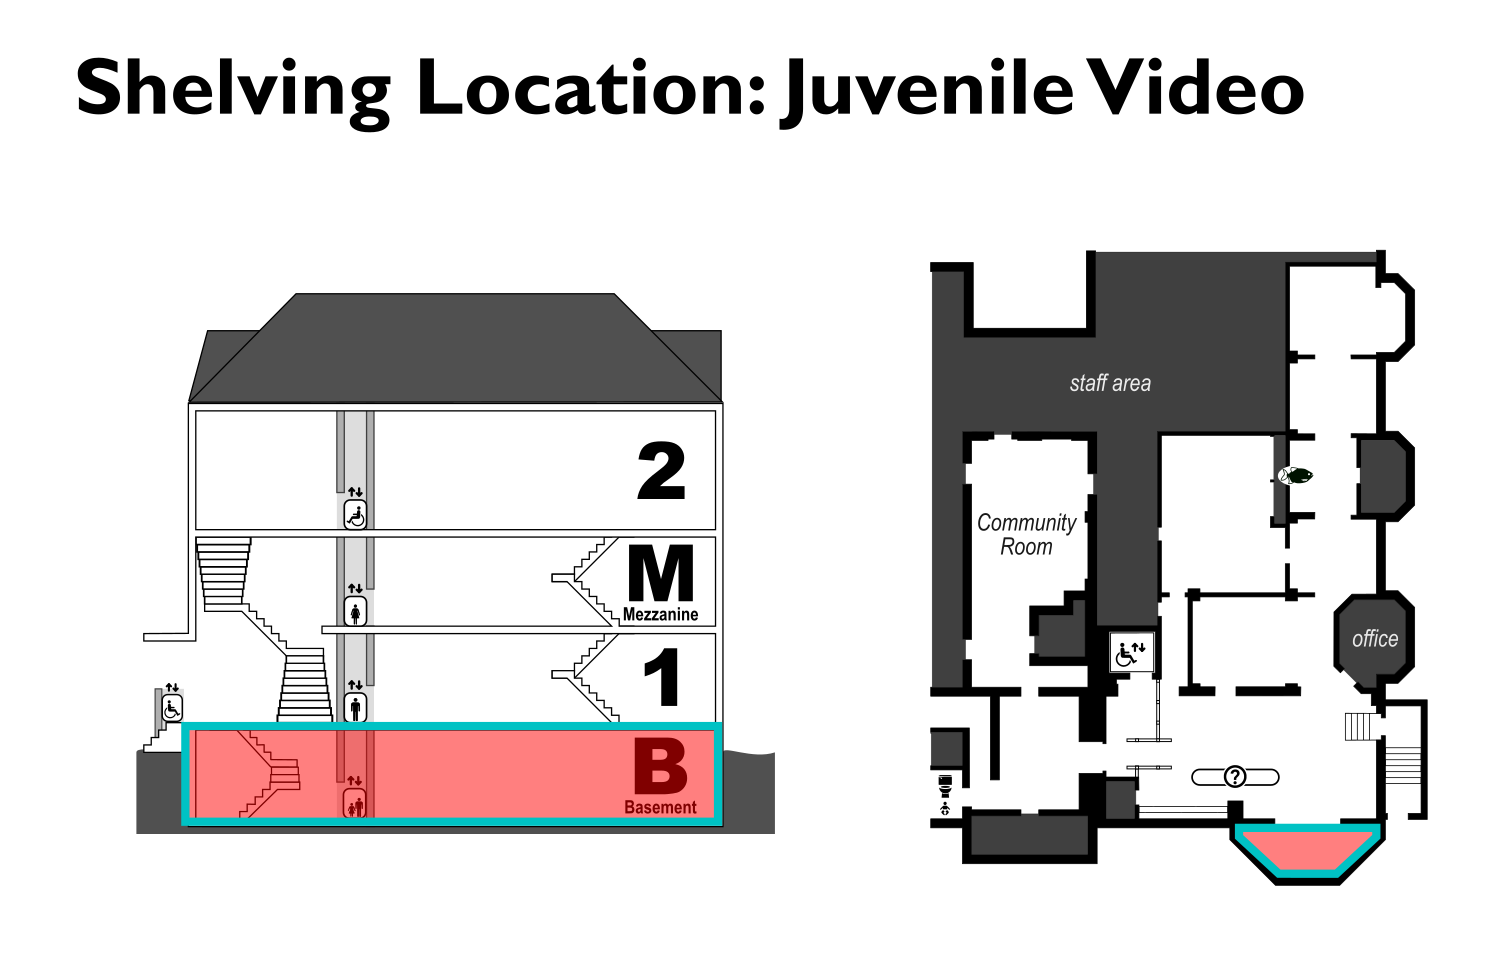 map showing location of the Juvenile Video shelving area